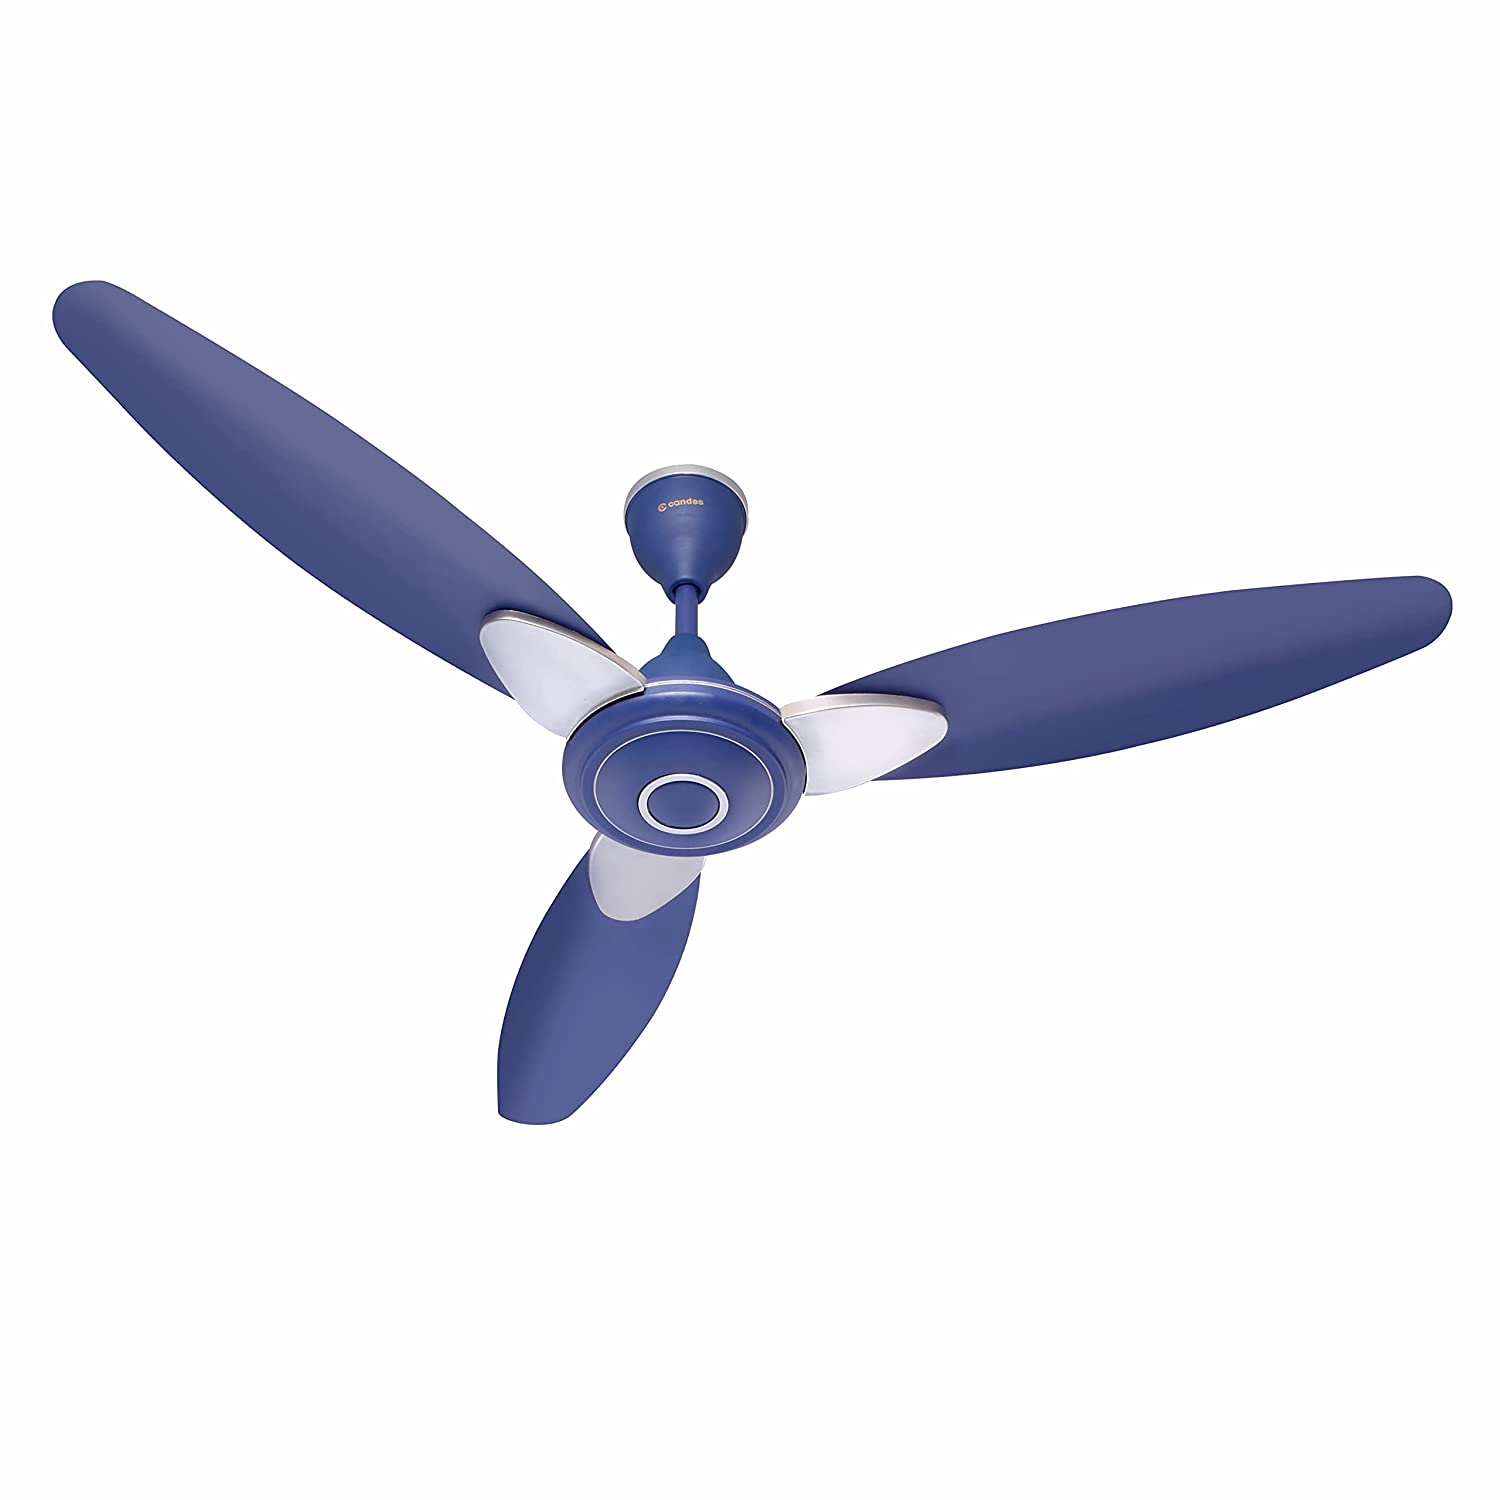 Candes Florence 1200mm / 48 inch Decorative Ceiling Fan